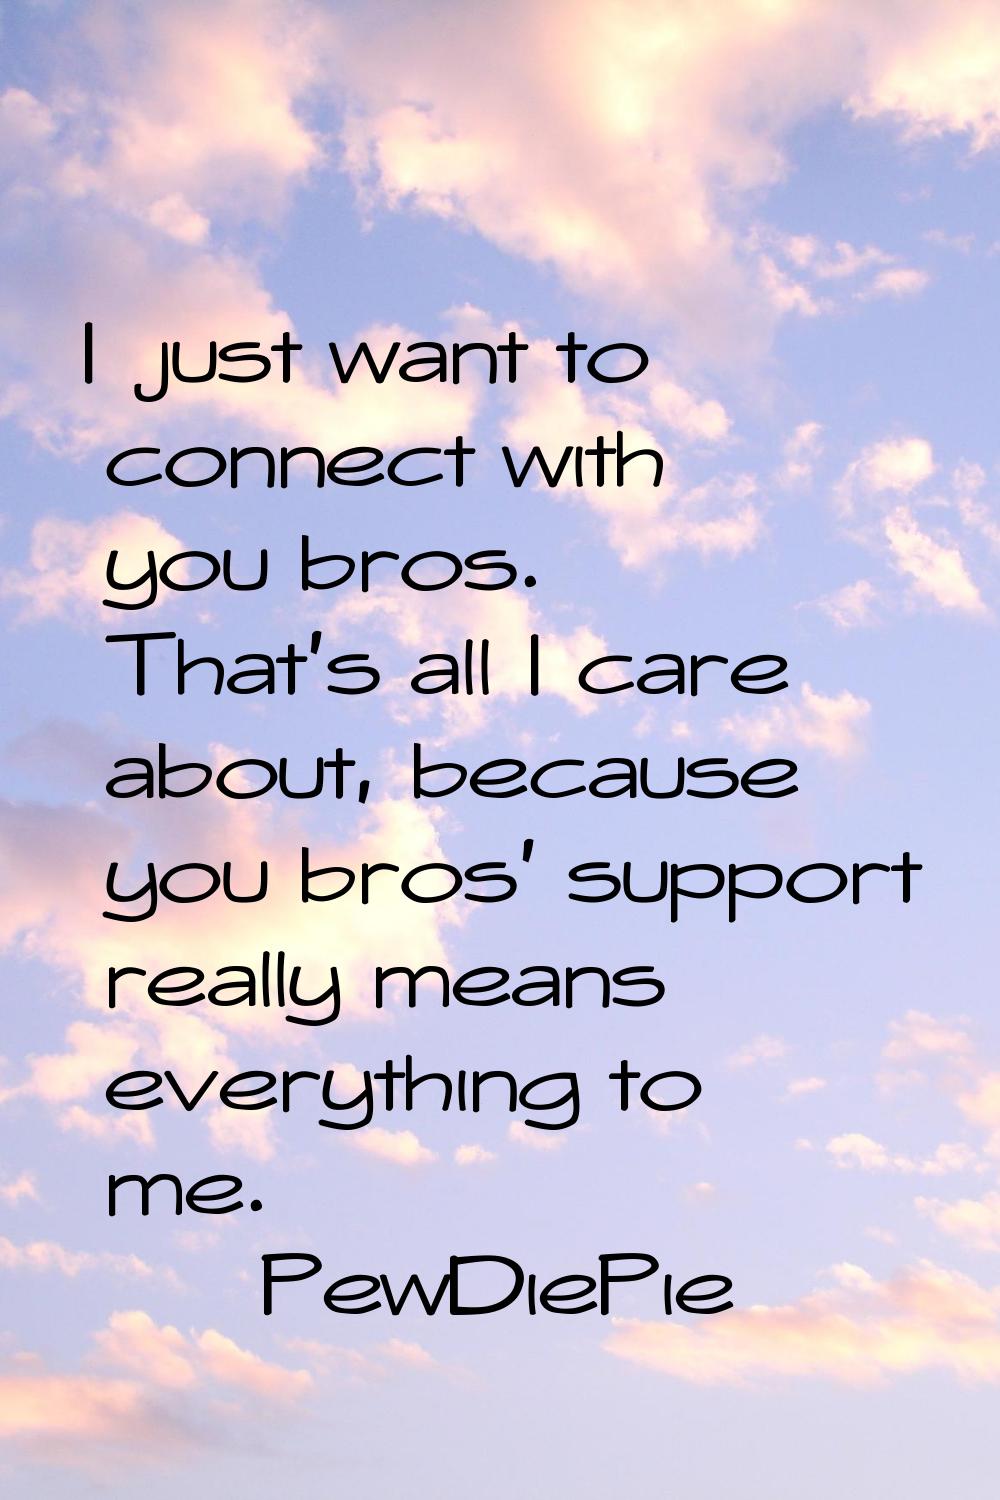 I just want to connect with you bros. That's all I care about, because you bros' support really mea